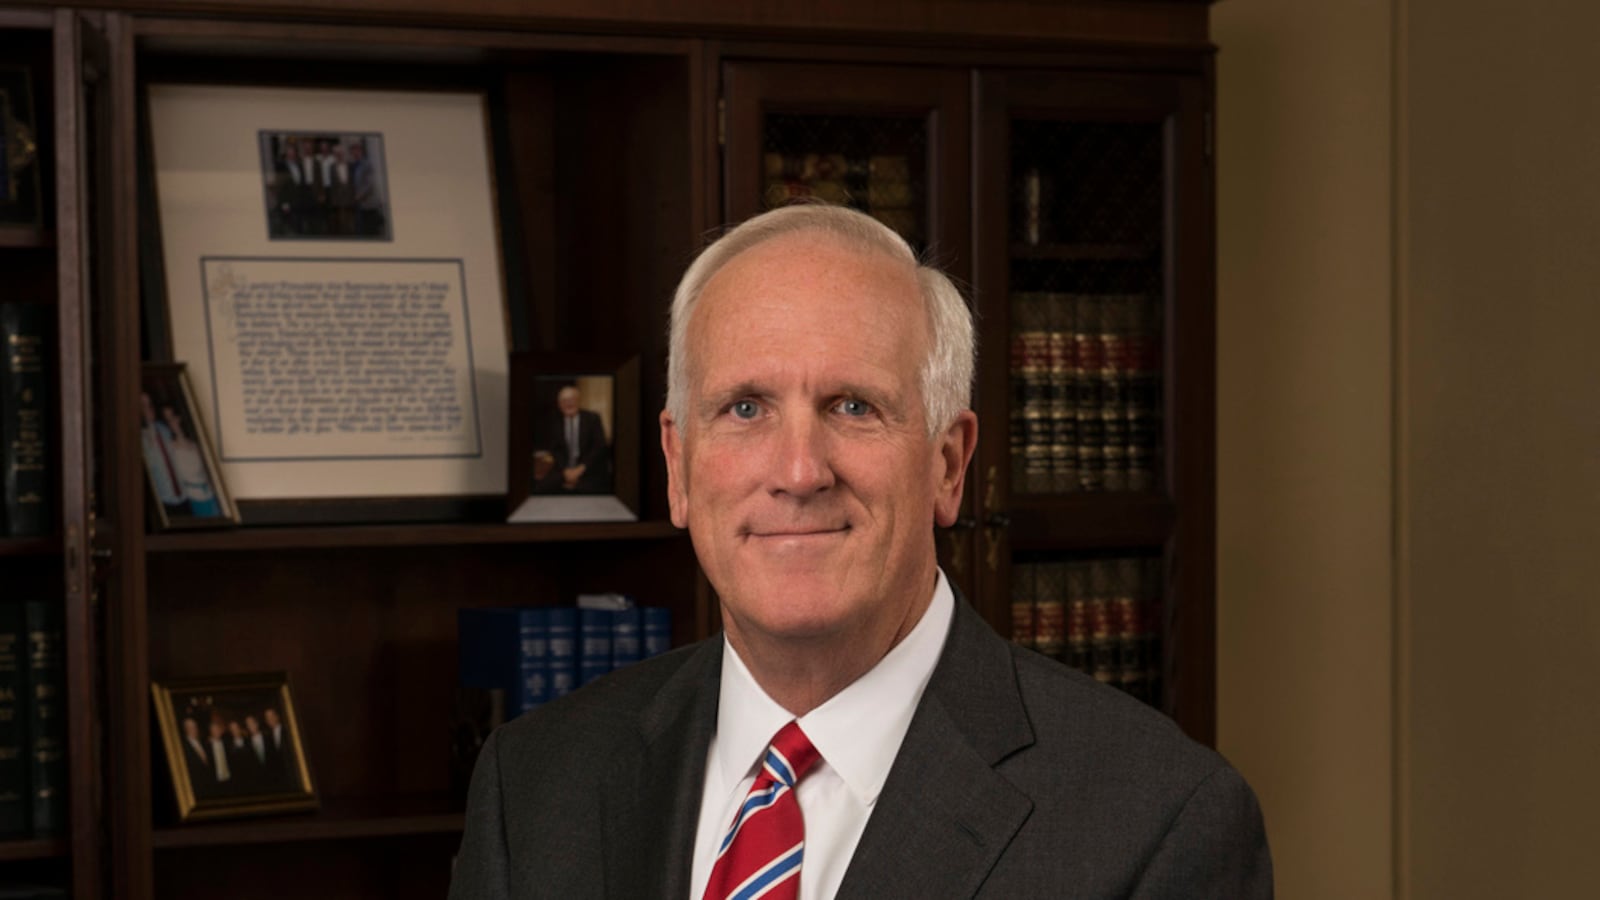 Herbert H. Slatery III was appointed Tennessee attorney general in 2014 by Gov. Bill Haslam, for whom he previously served as general counsel.